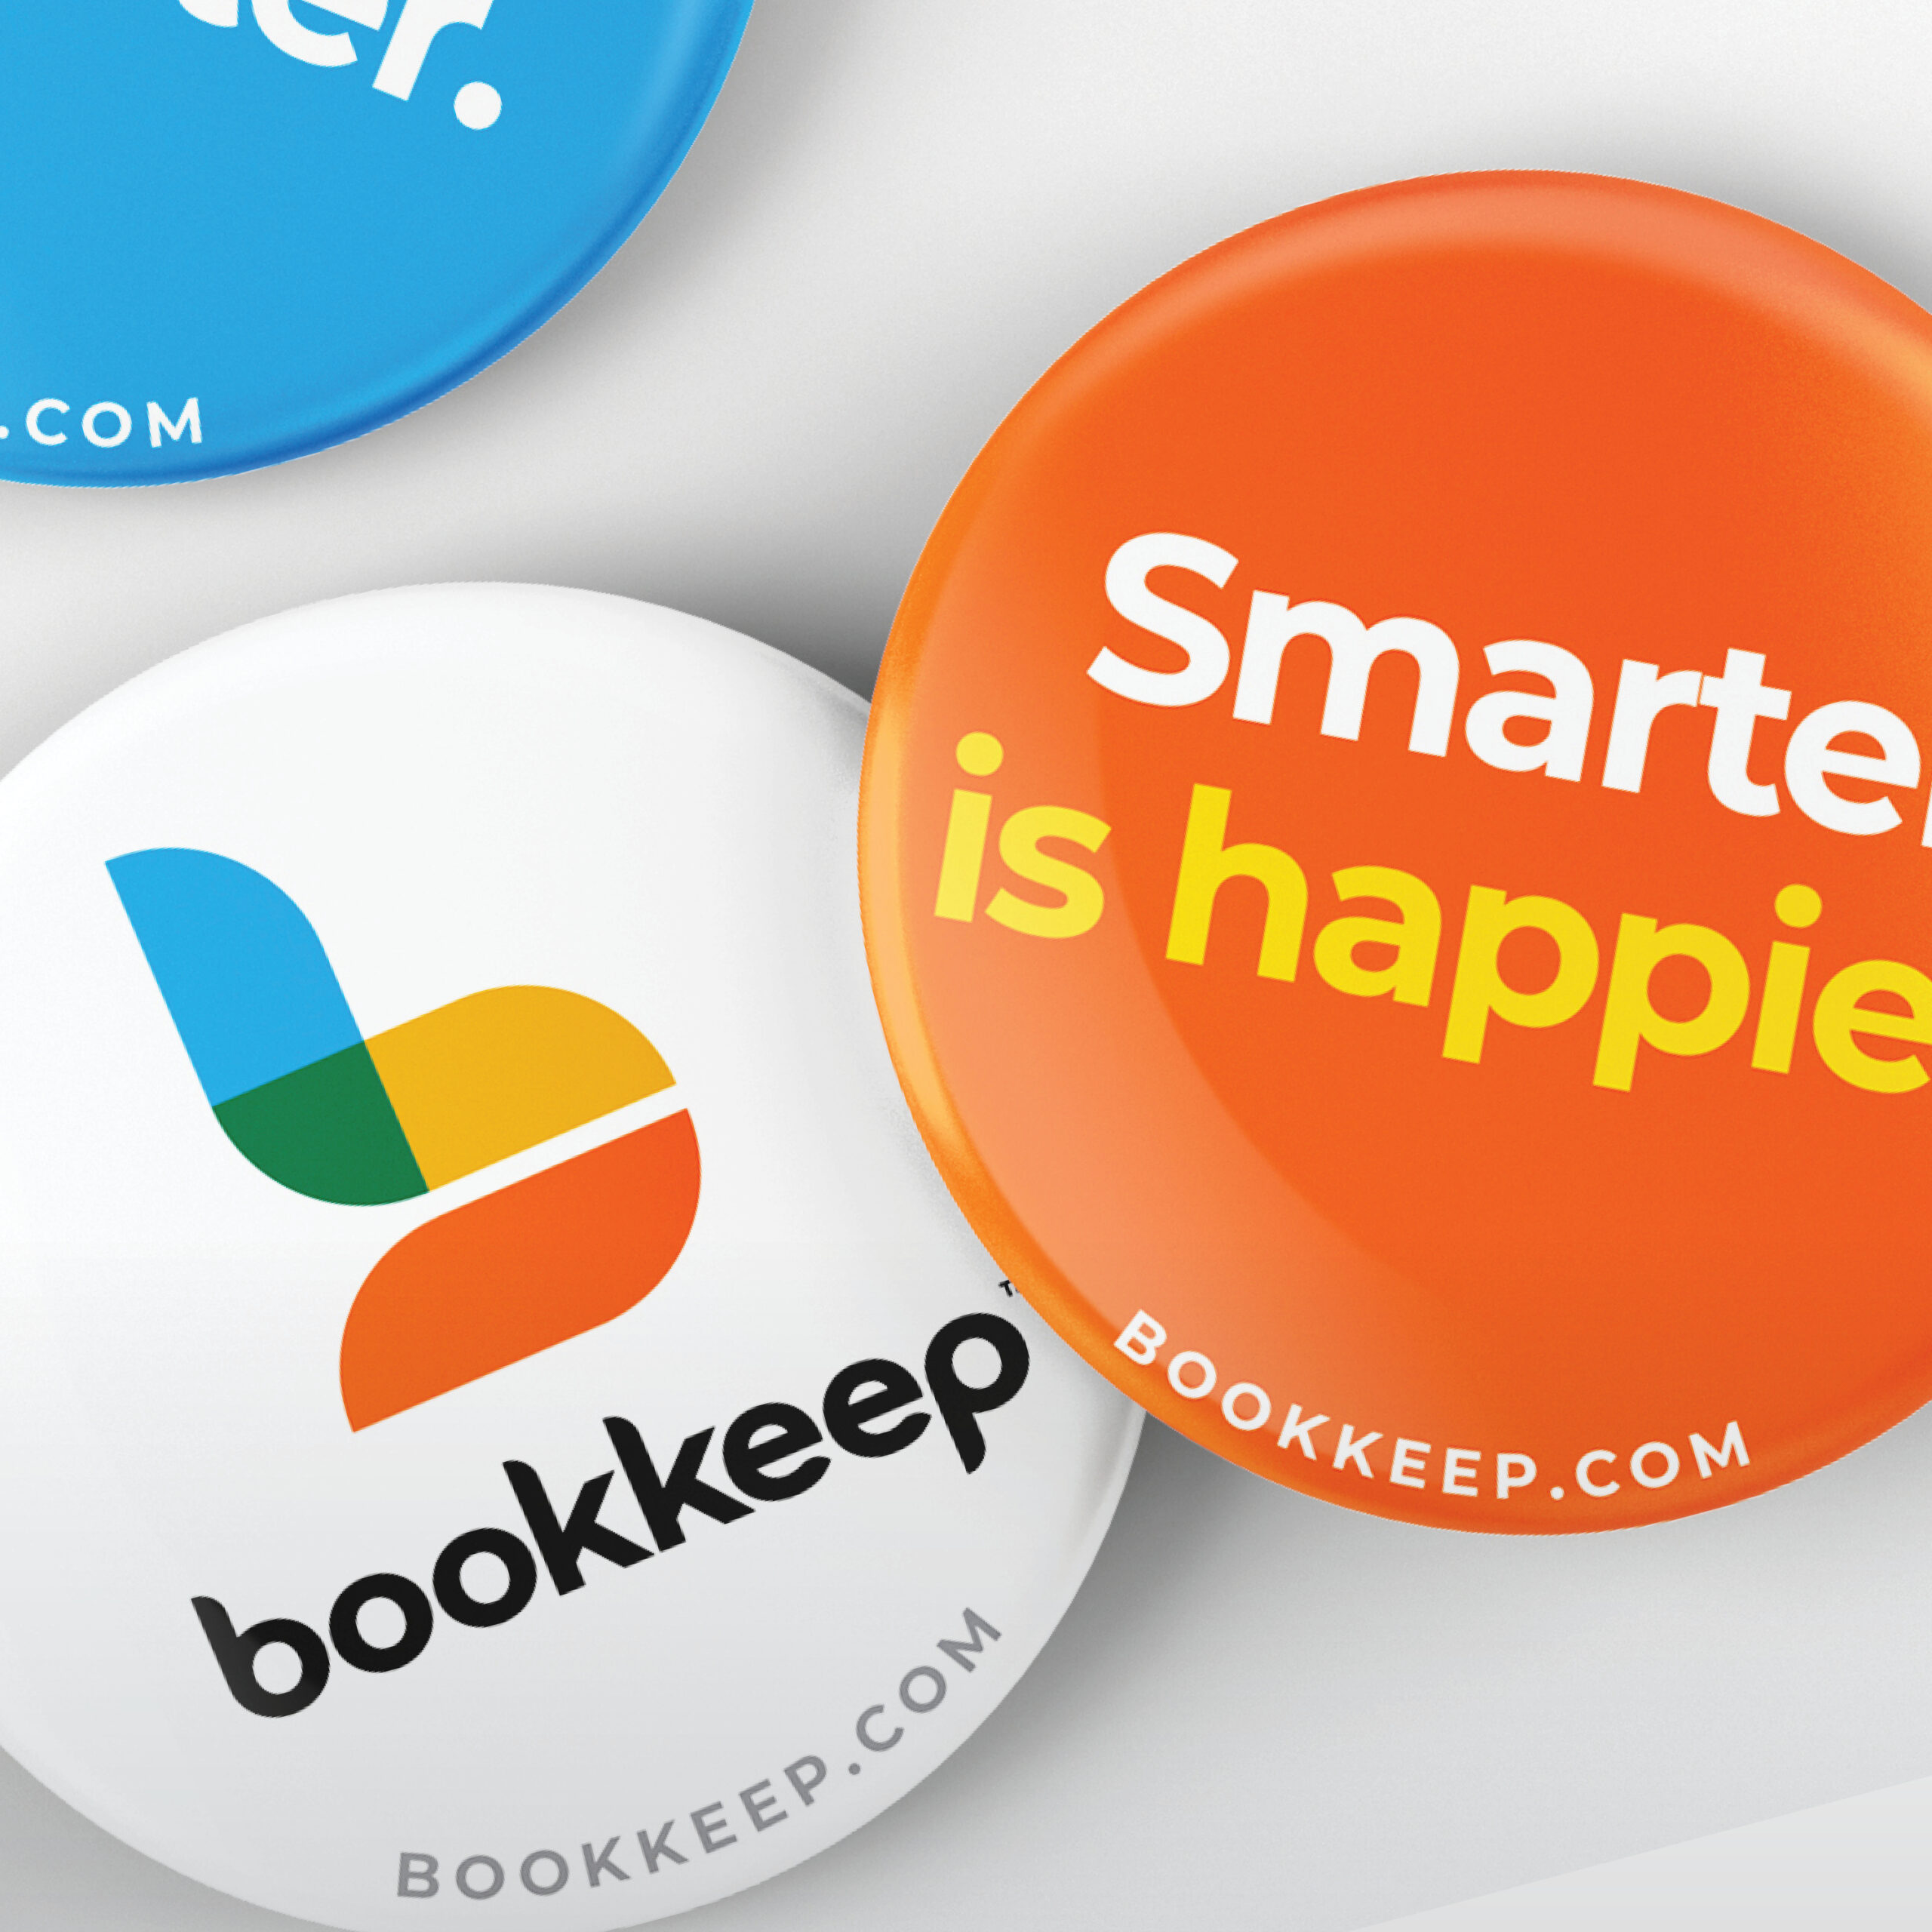 We took Bookkeep from bland to the smarter brand.